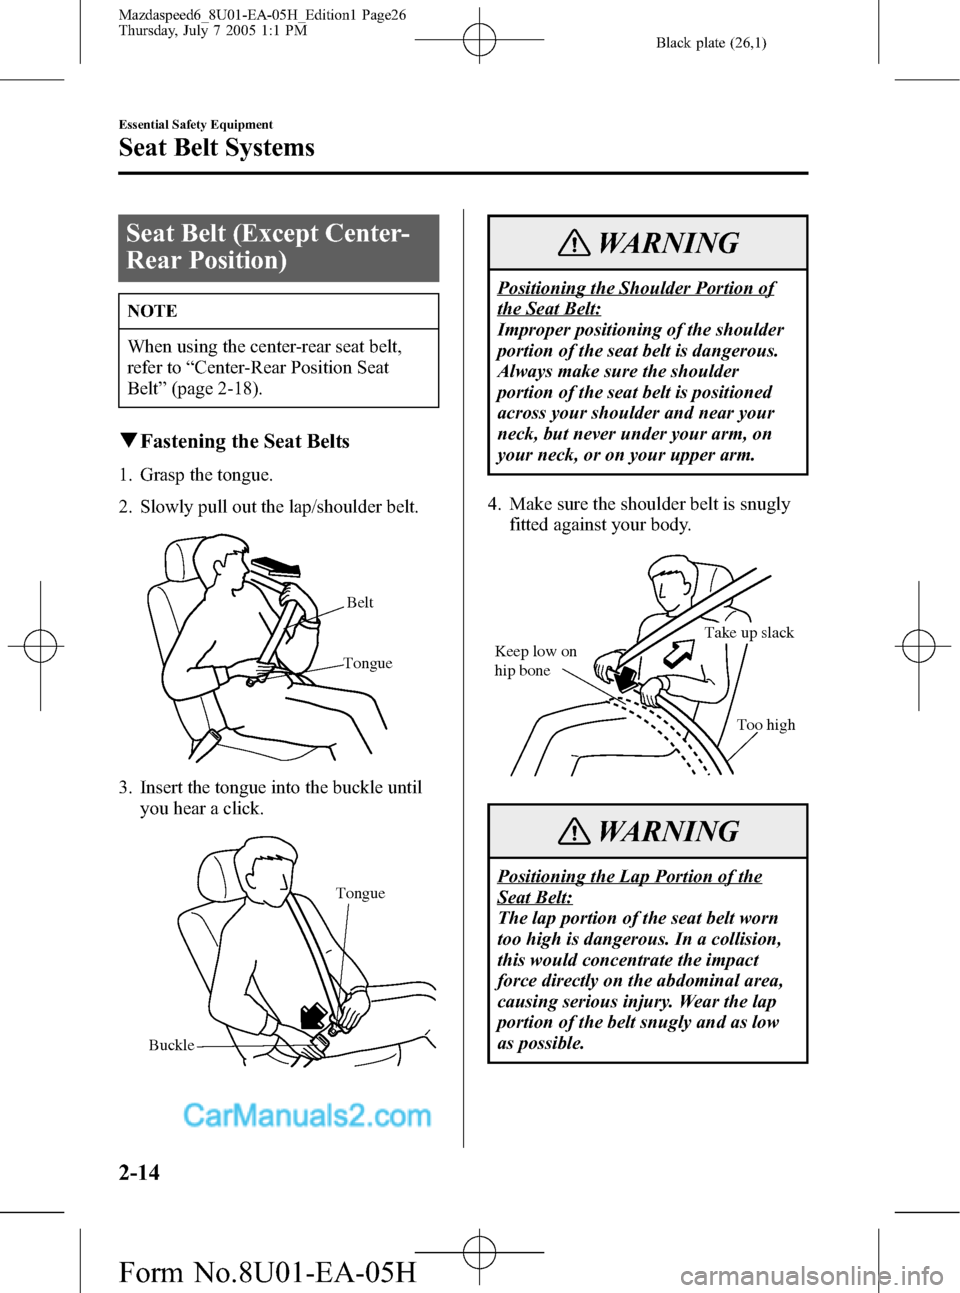 MAZDA MODEL MAZDASPEED 6 2006   (in English) Owners Manual Black plate (26,1)
Seat Belt (Except Center-
Rear Position)
NOTE
When using the center-rear seat belt,
refer to“Center-Rear Position Seat
Belt”(page 2-18).
qFastening the Seat Belts
1. Grasp the t